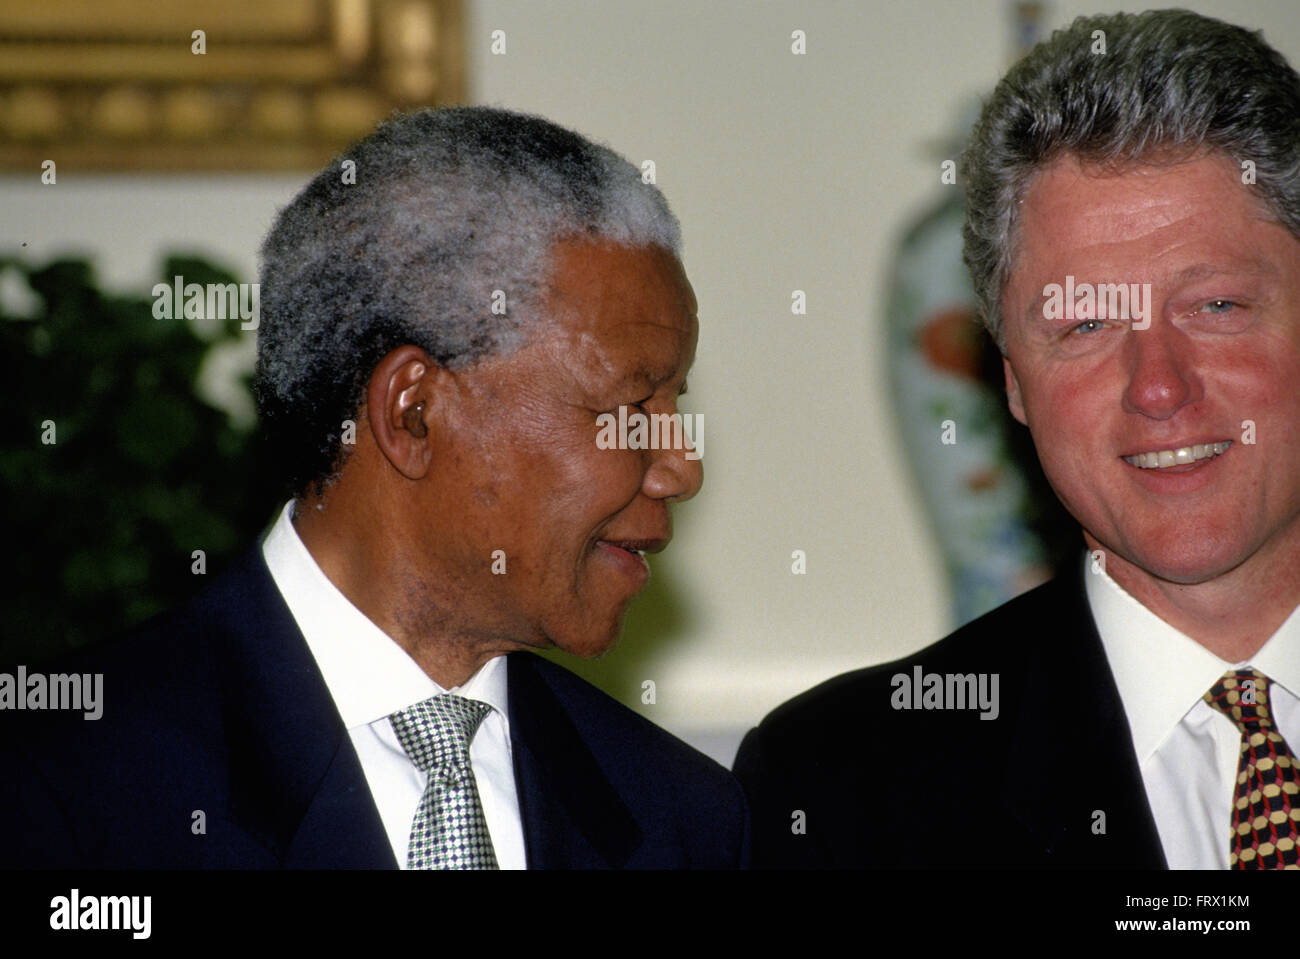 Washington, DC., USA, 5th October, 1994 President William Jefferson Clinton hosts South African President Nelson Mandella at the White House. Mandella was a South African anti apartheid revolutionary, politician and philanthropist who served as President of South Africa from 1994 to 1999. He was South Africa's first black chief executive, and the first elected in a fully representative democratic election. His government focused on dismantling the legacy of apartheid through tackling institutionalized racism, poverty and inequality, and fostering racial reconciliation.  Credit: Mark Reinstein Stock Photo